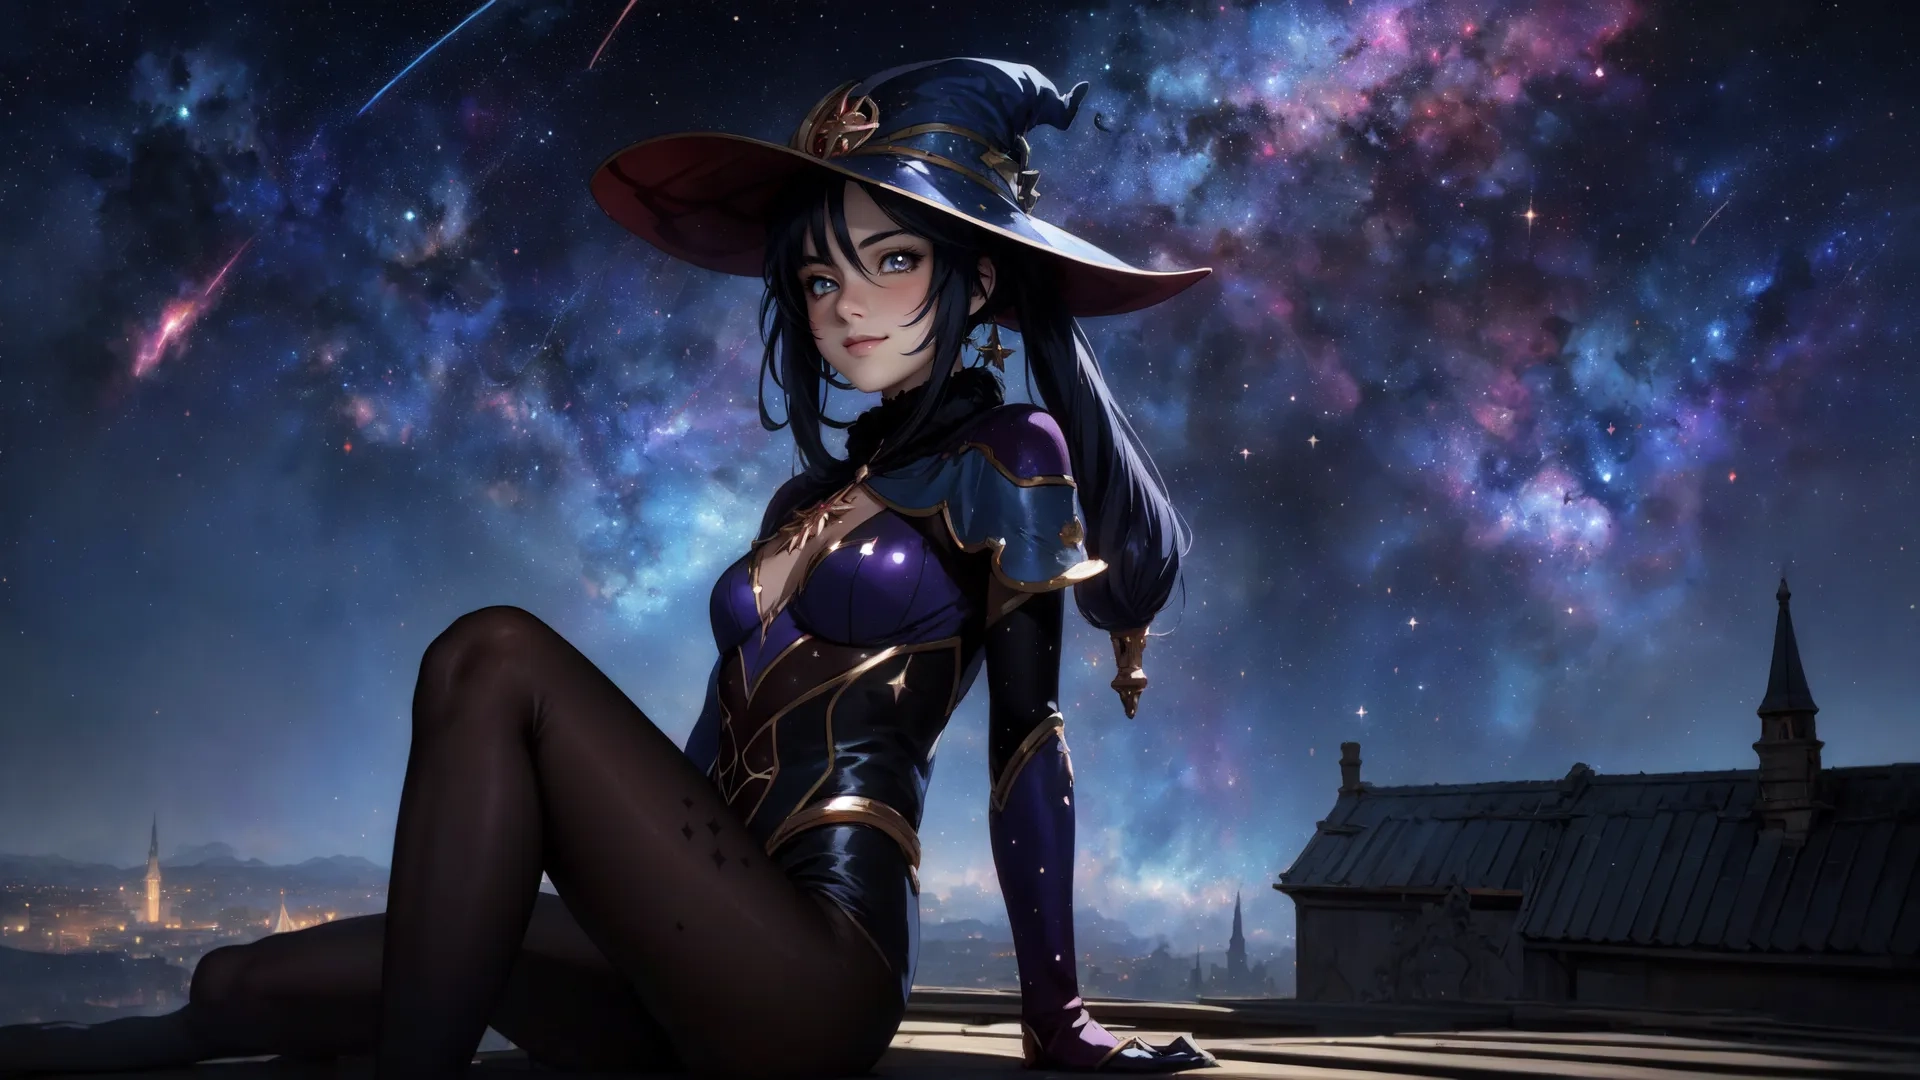 a woman is dressed in costume and sitting on the roof with a hat and boots, wearing a full bodysuit, holding a sword, and looking toward the starr background
